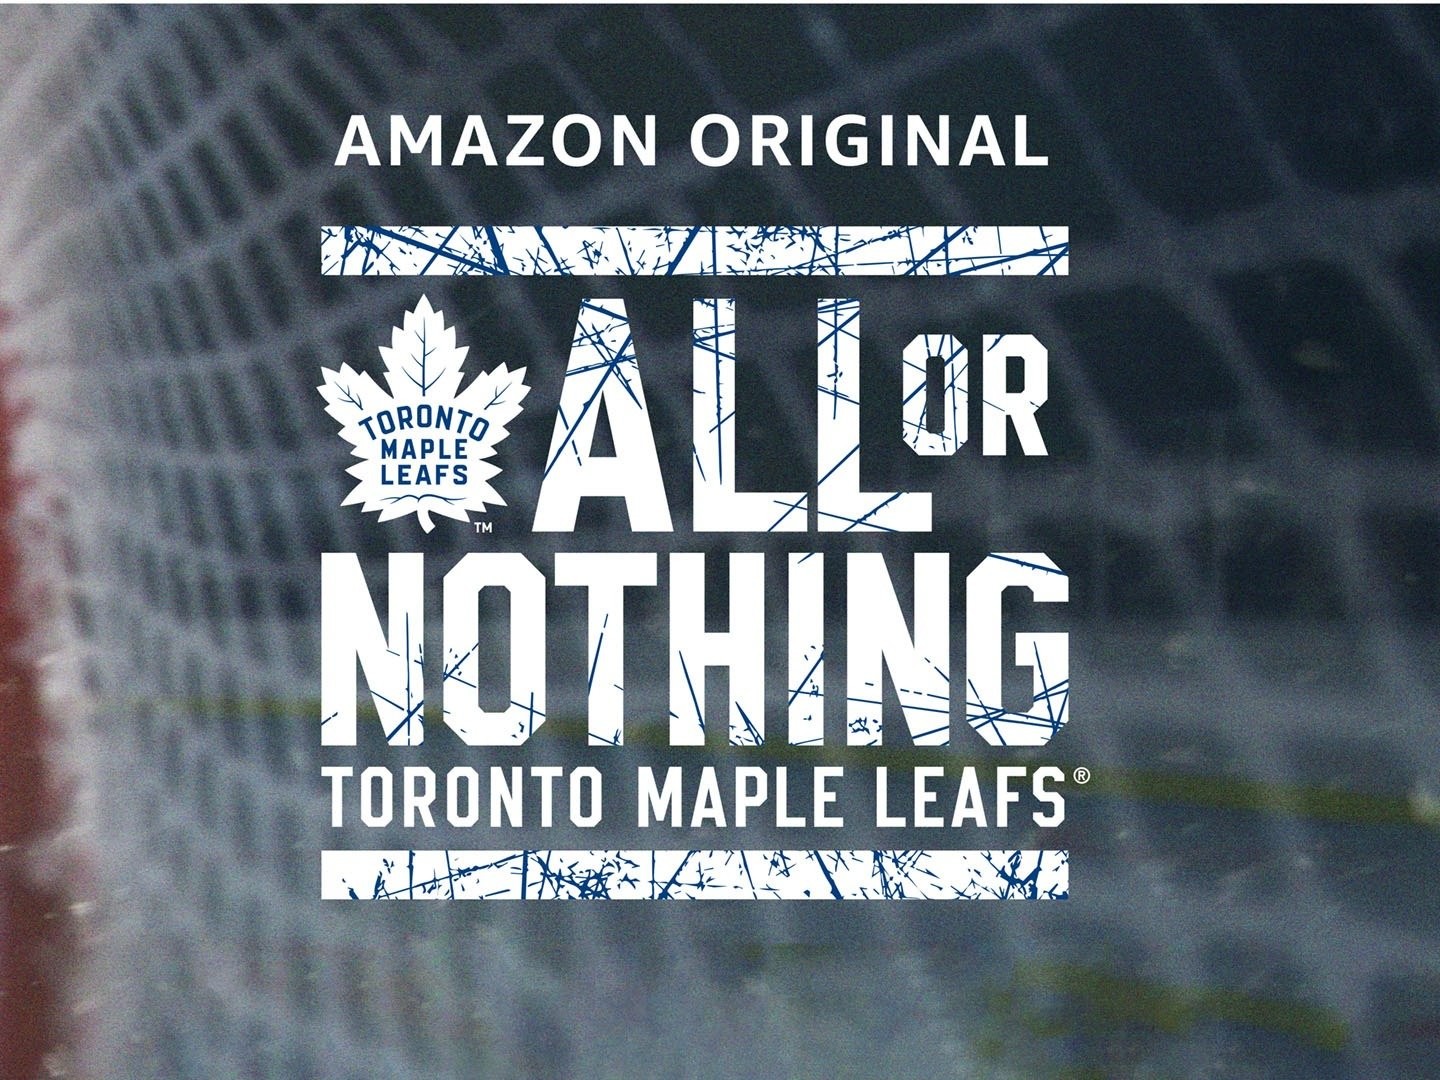 All or Nothing: Toronto Maple Leafs (TV Series 2021) - “Cast